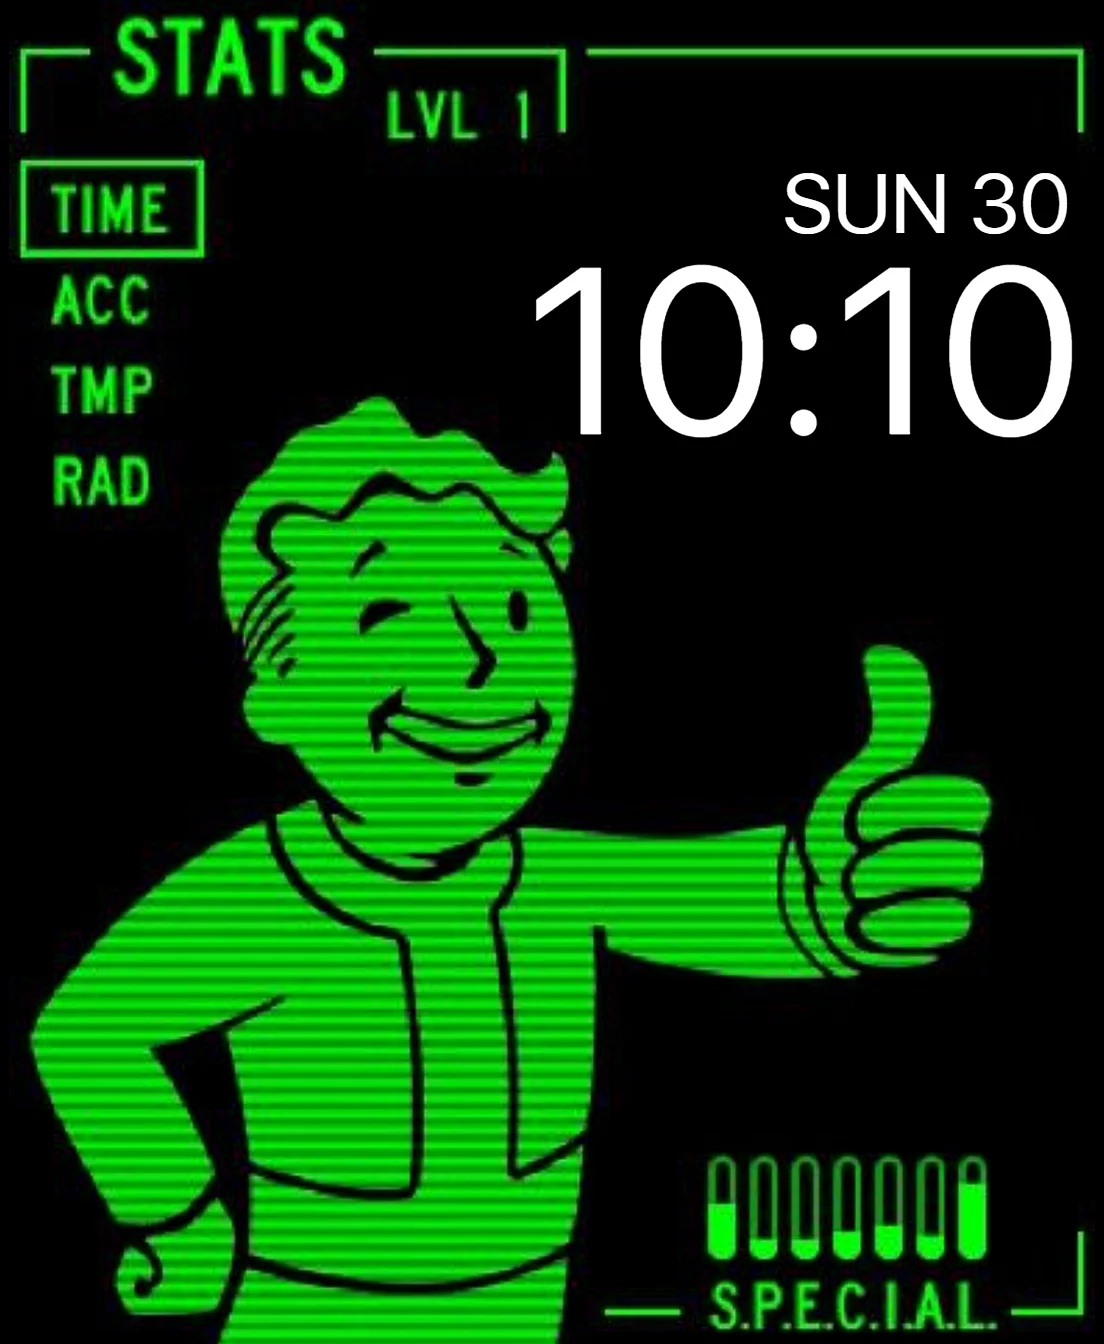 Apple Watch Pip Boy Wallpaper For iPhone